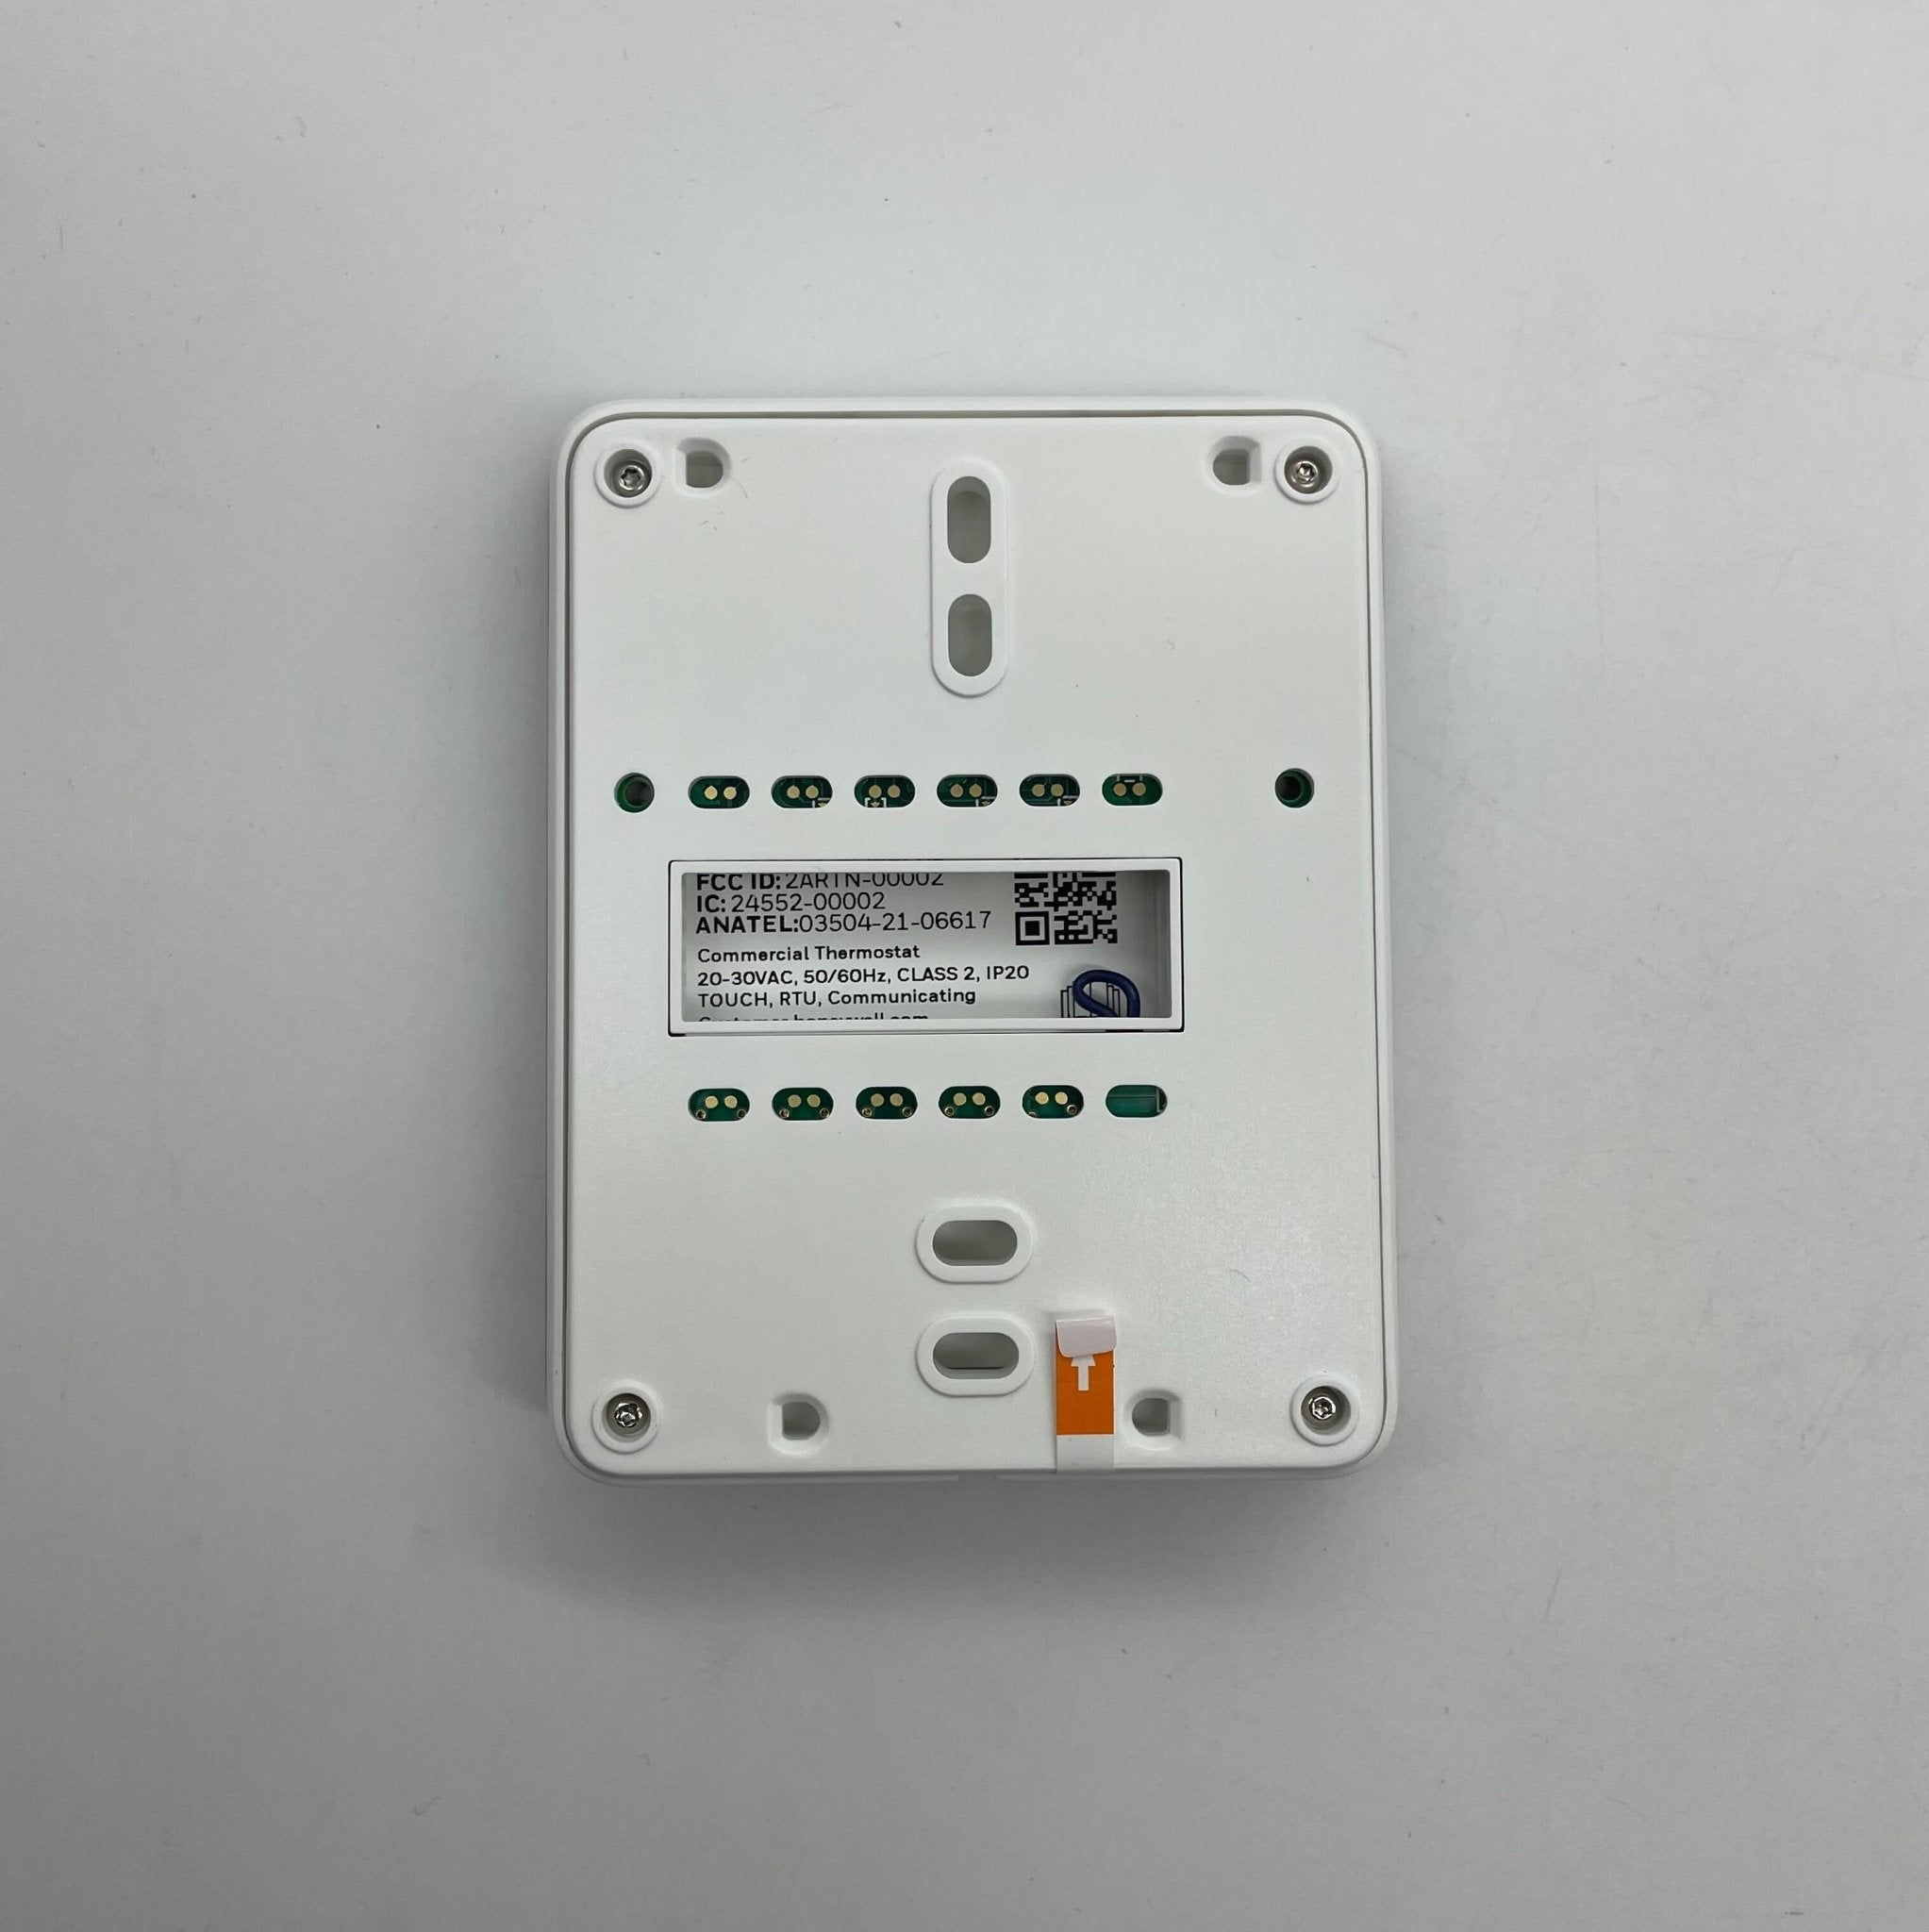 Honeywell TC500A-N Wireless Commercial Thermostat - The Fire Alarm Supplier